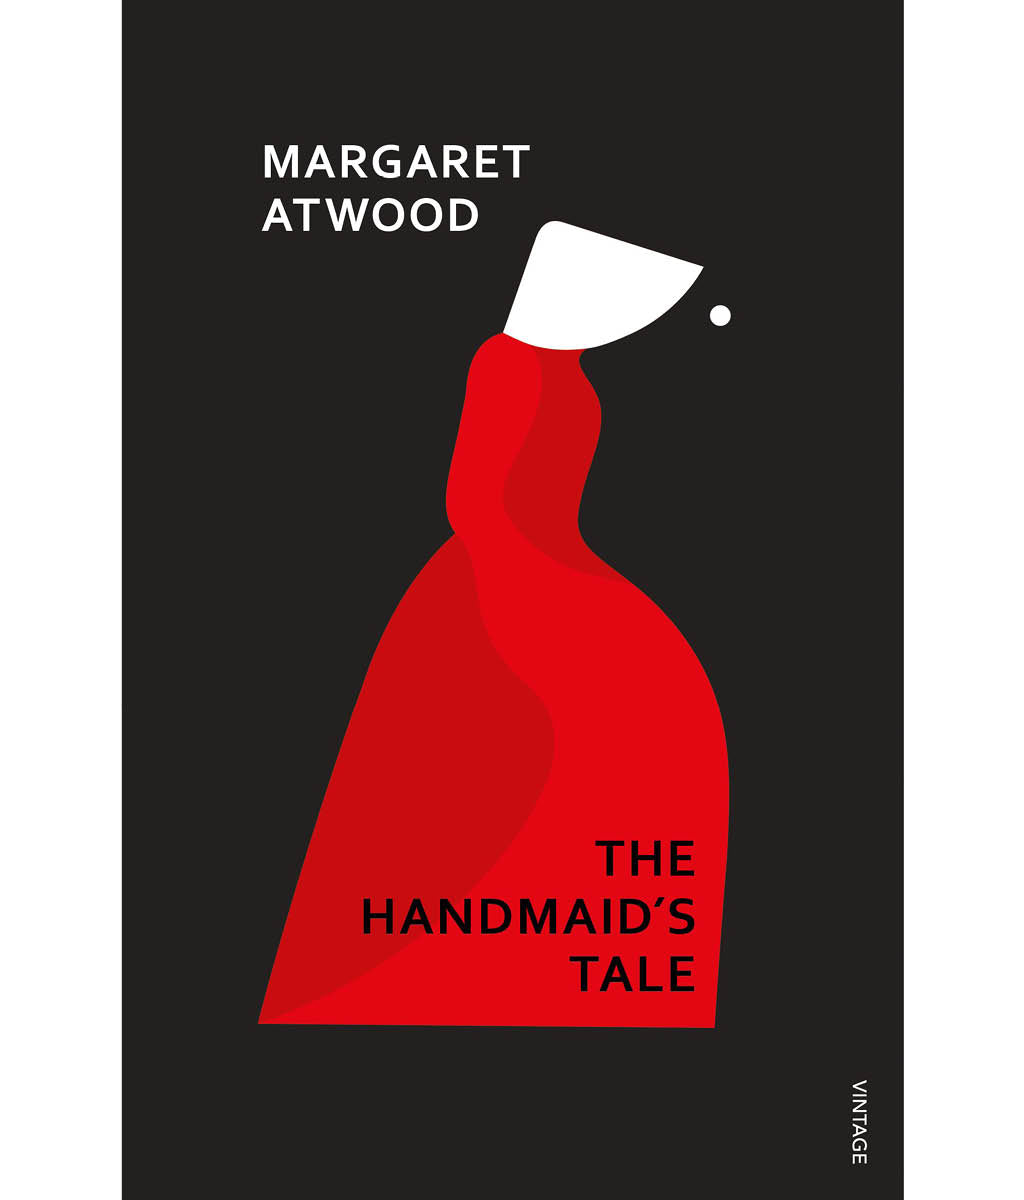 The handmaid's tale  by Margaret Atwood